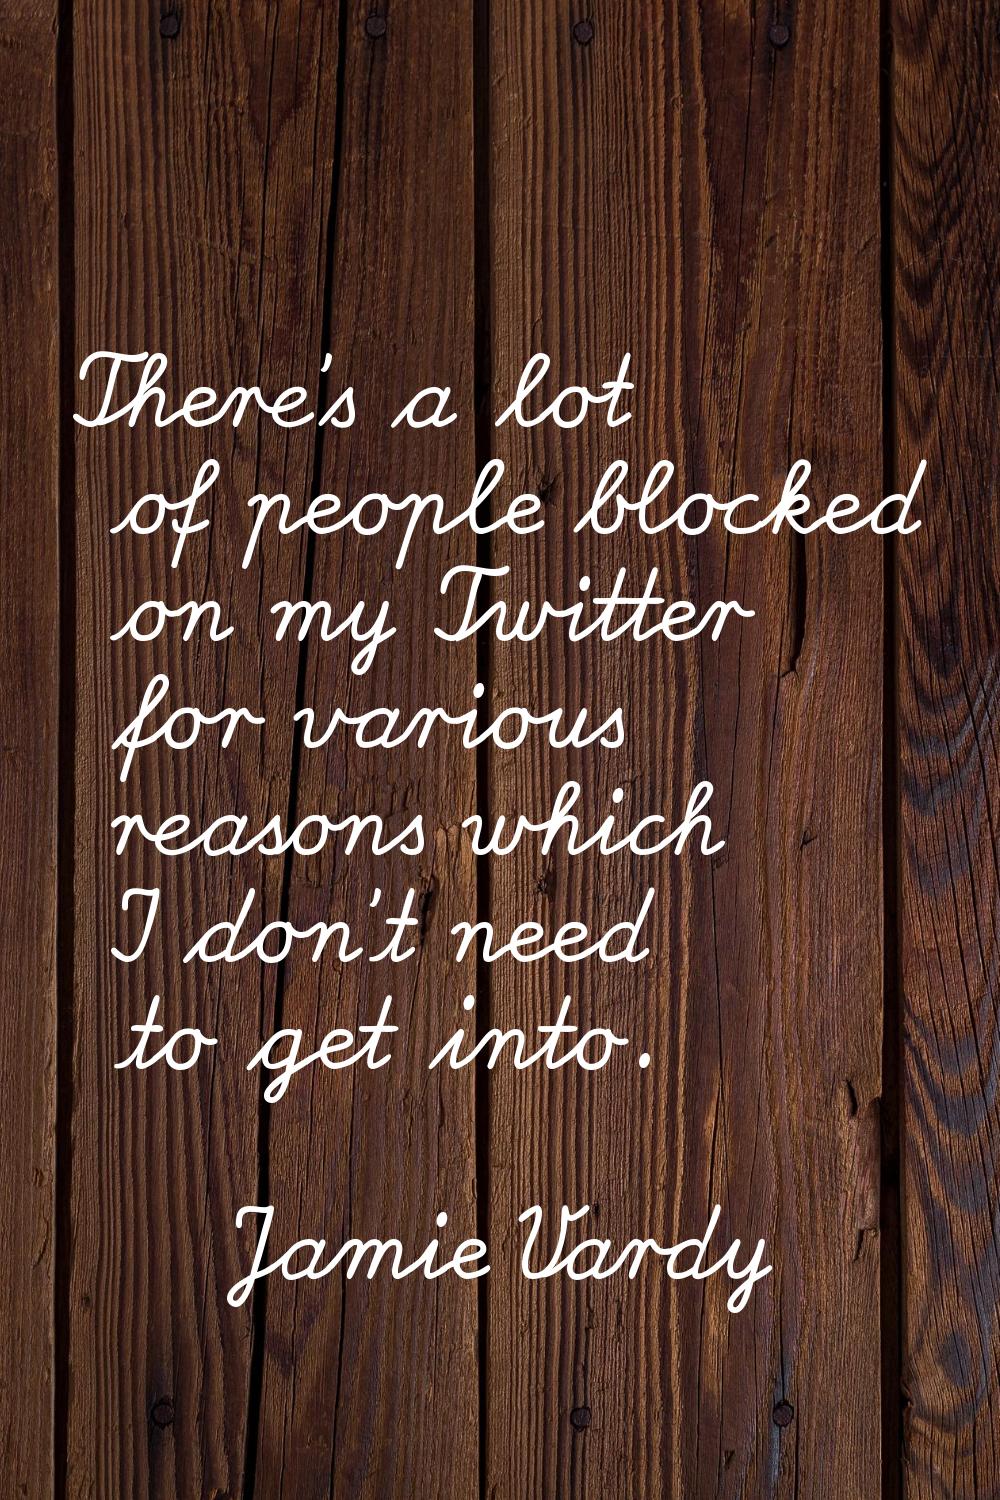 There's a lot of people blocked on my Twitter for various reasons which I don't need to get into.